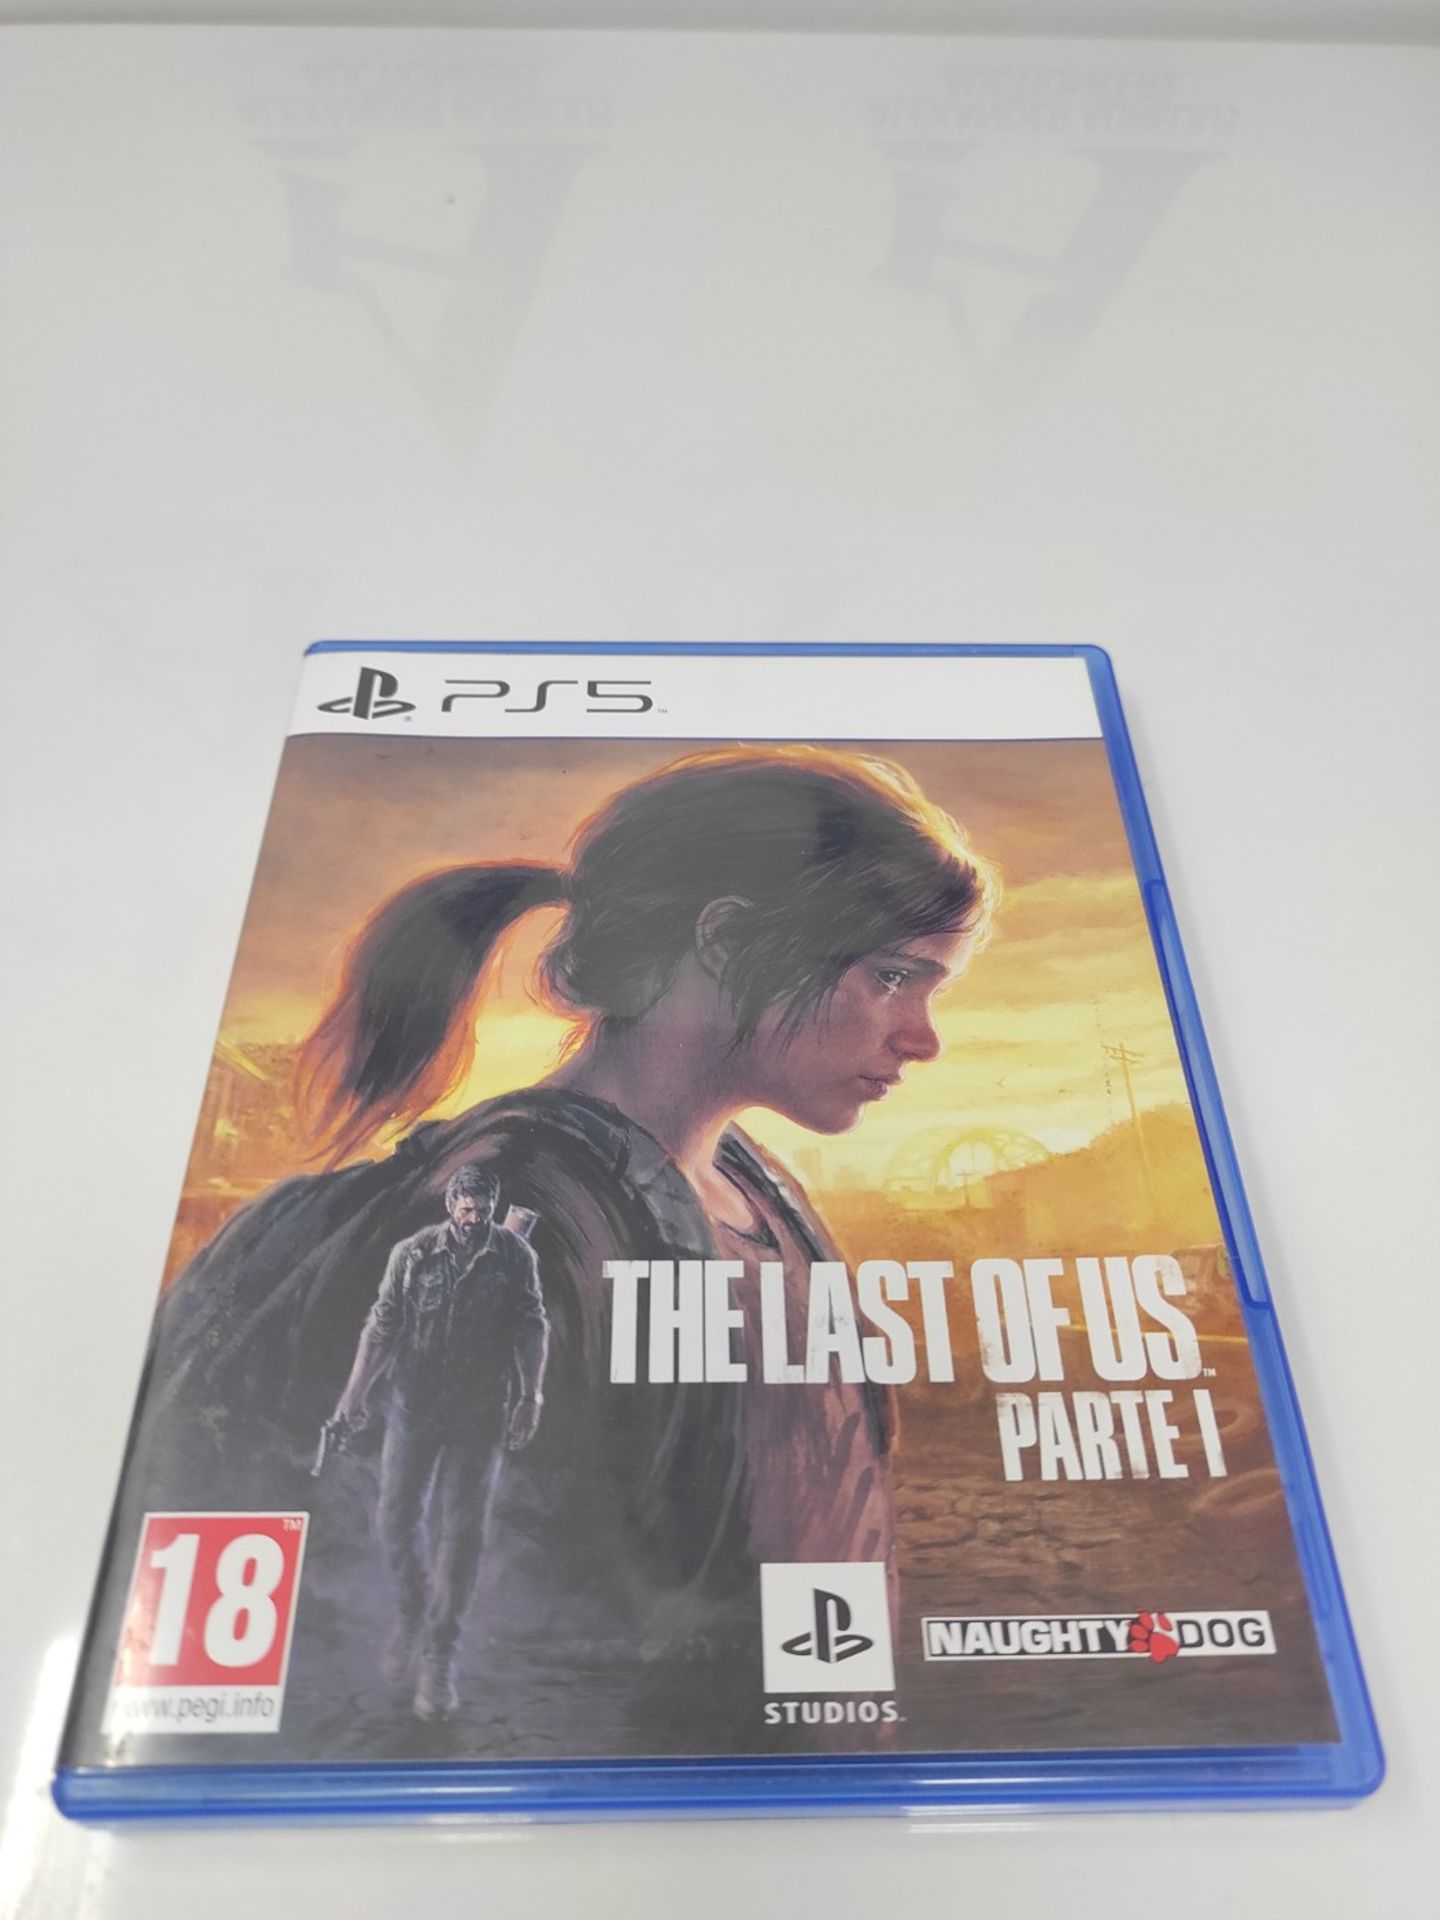 RRP £64.00 The Last of Us Part 1 for PS5 (uncut Edition) (German packaging) - Image 3 of 4